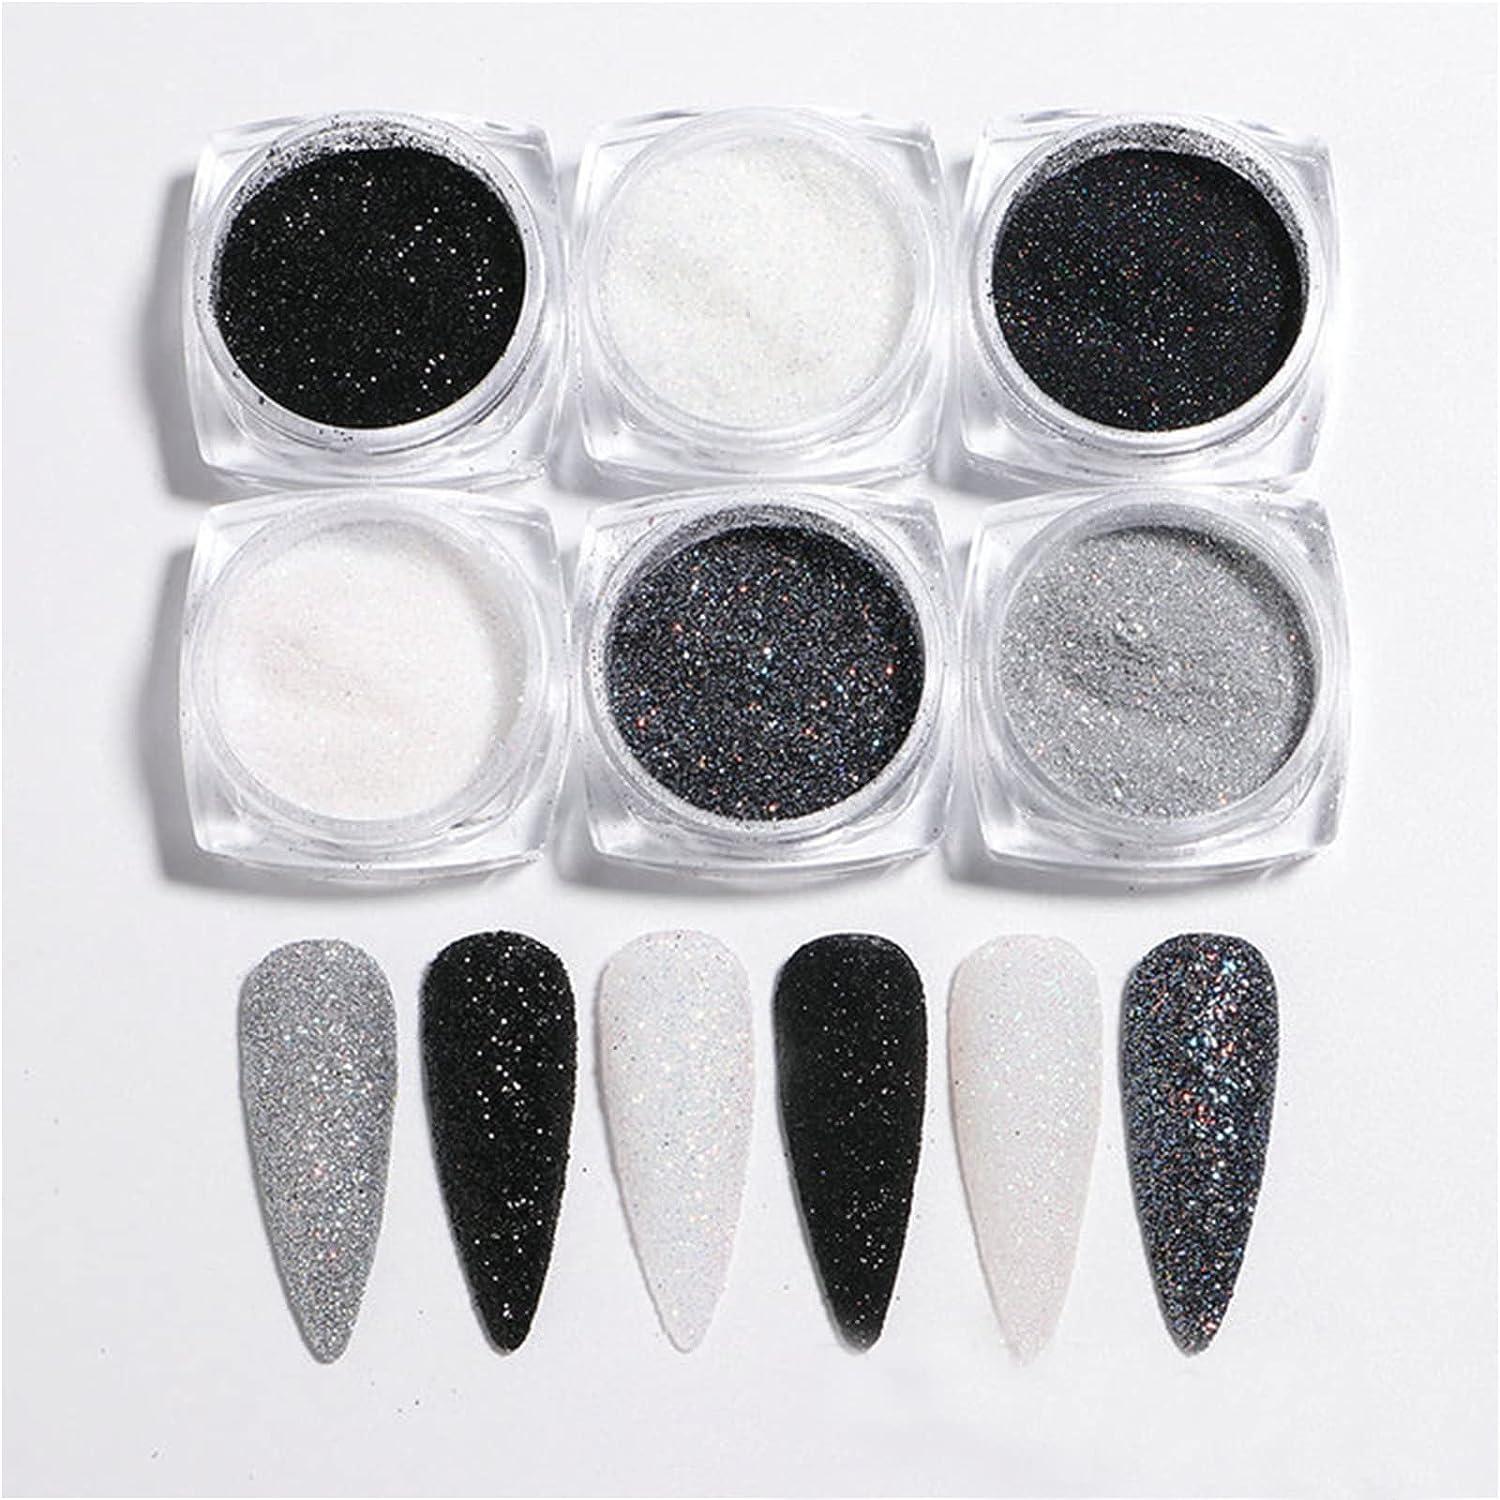  6 Jars Nail Glitter Powder Black White Sliver Dust Sugar  Powder, Superfine French Nail Sugar Glitter Iridescent Candy Coat Nails  Sweater Design Manicure Decorations DIY Crafts : Beauty & Personal Care